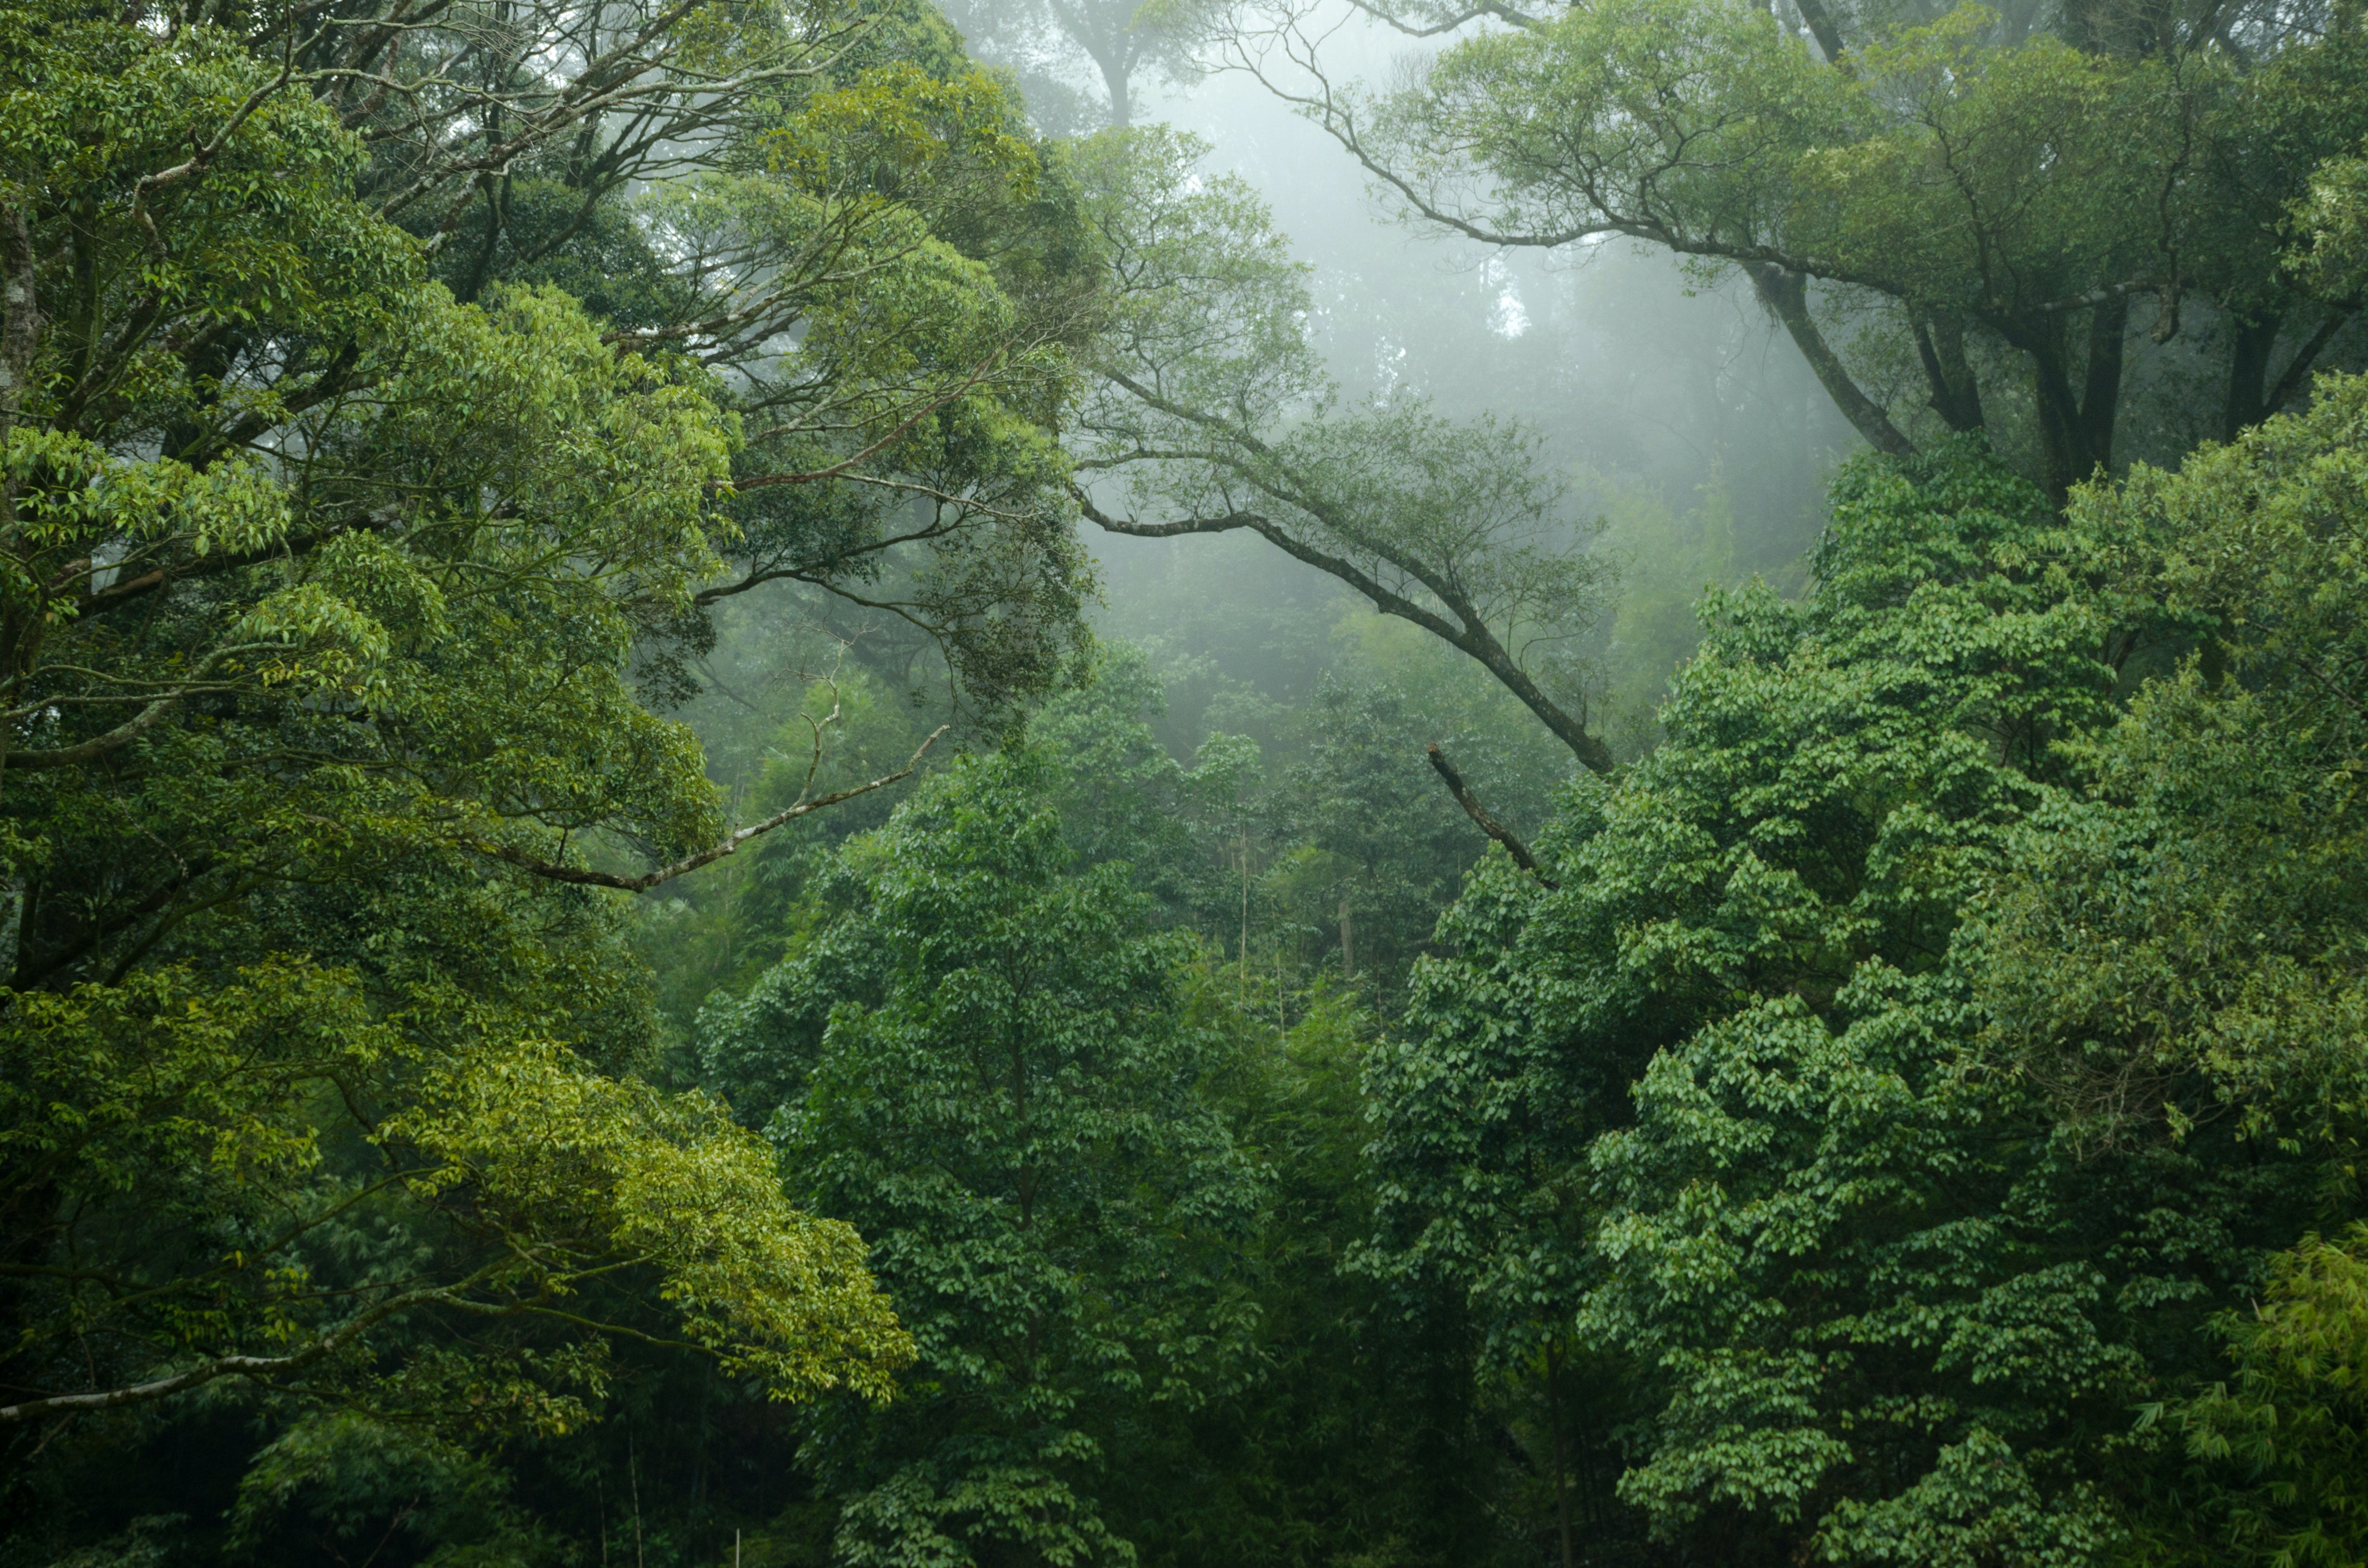 Plant trees, or protect our rainforest, what's best for our future?